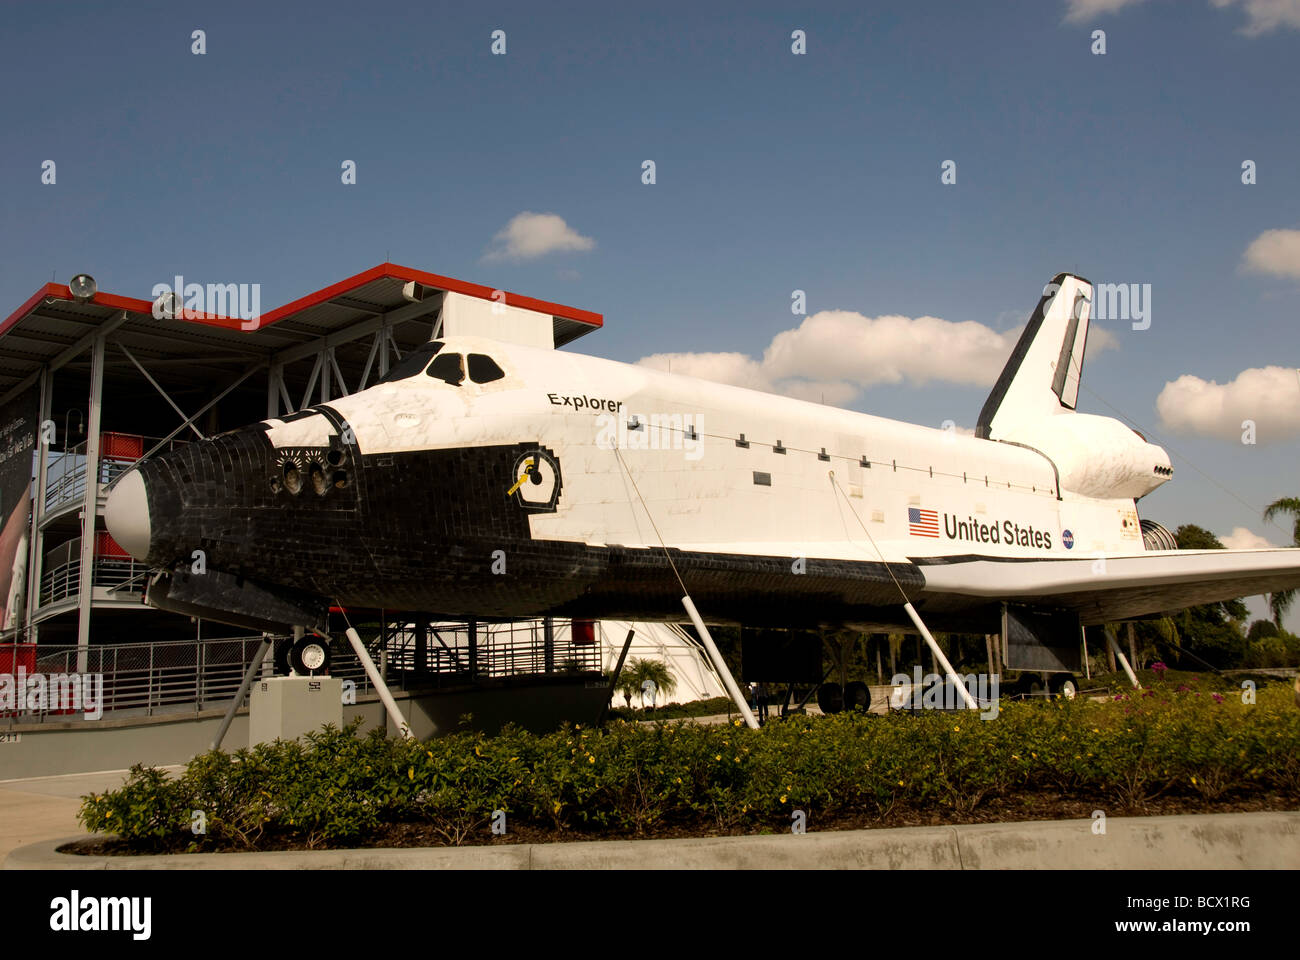 Space shuttle on display at Kennedy Space Center Visitors Complex Cape Canaveral, Florida Stock Photo